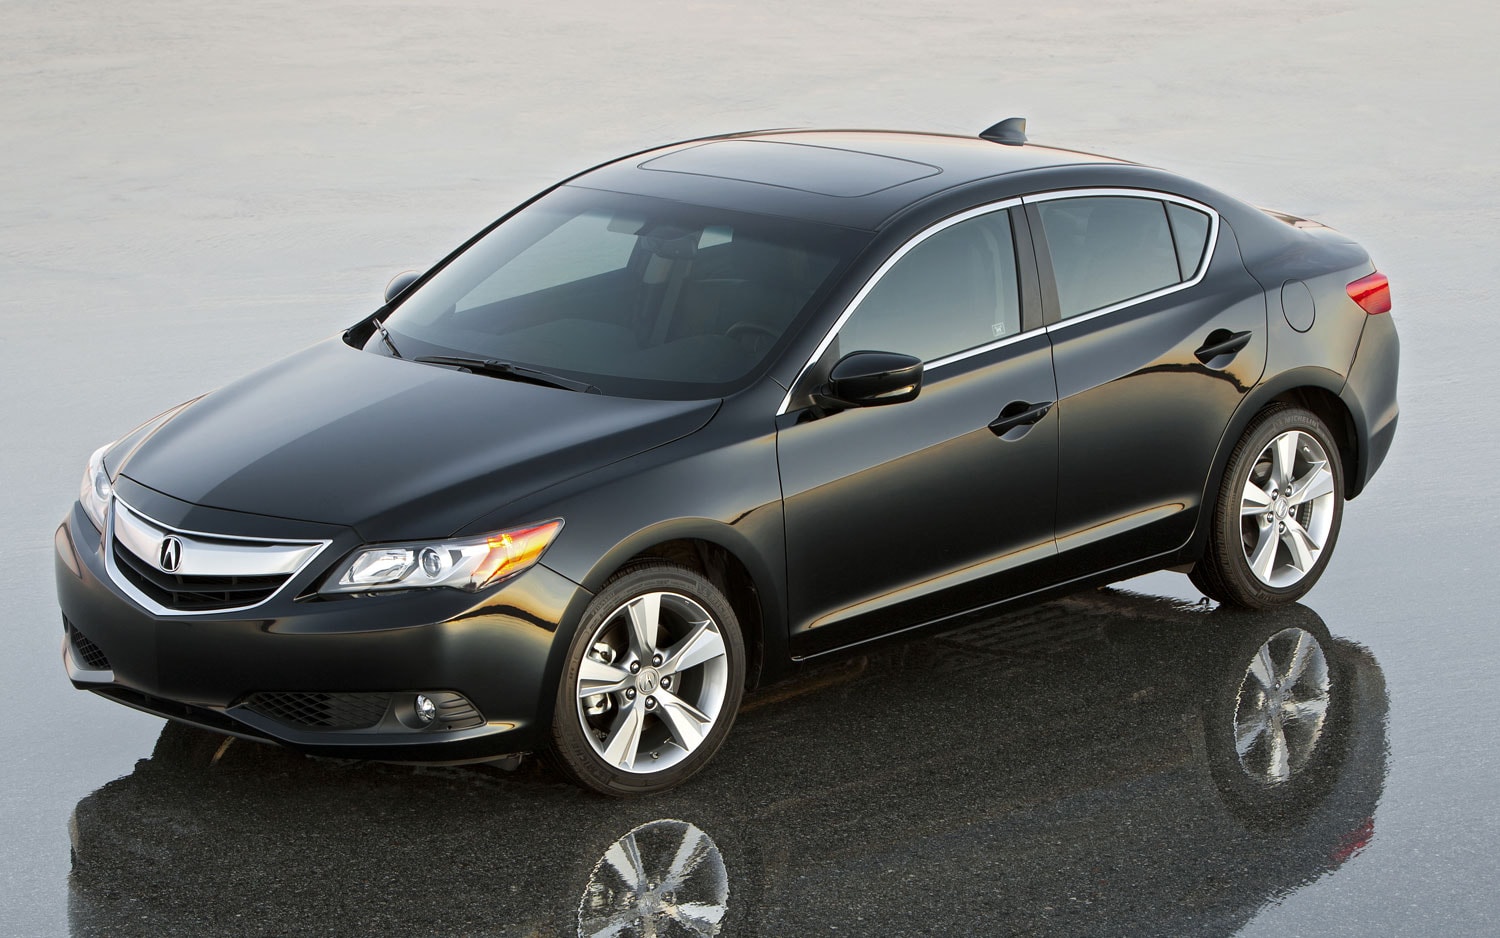 2014 Acura ILX Gets More Standard Features, Starts at $27,795